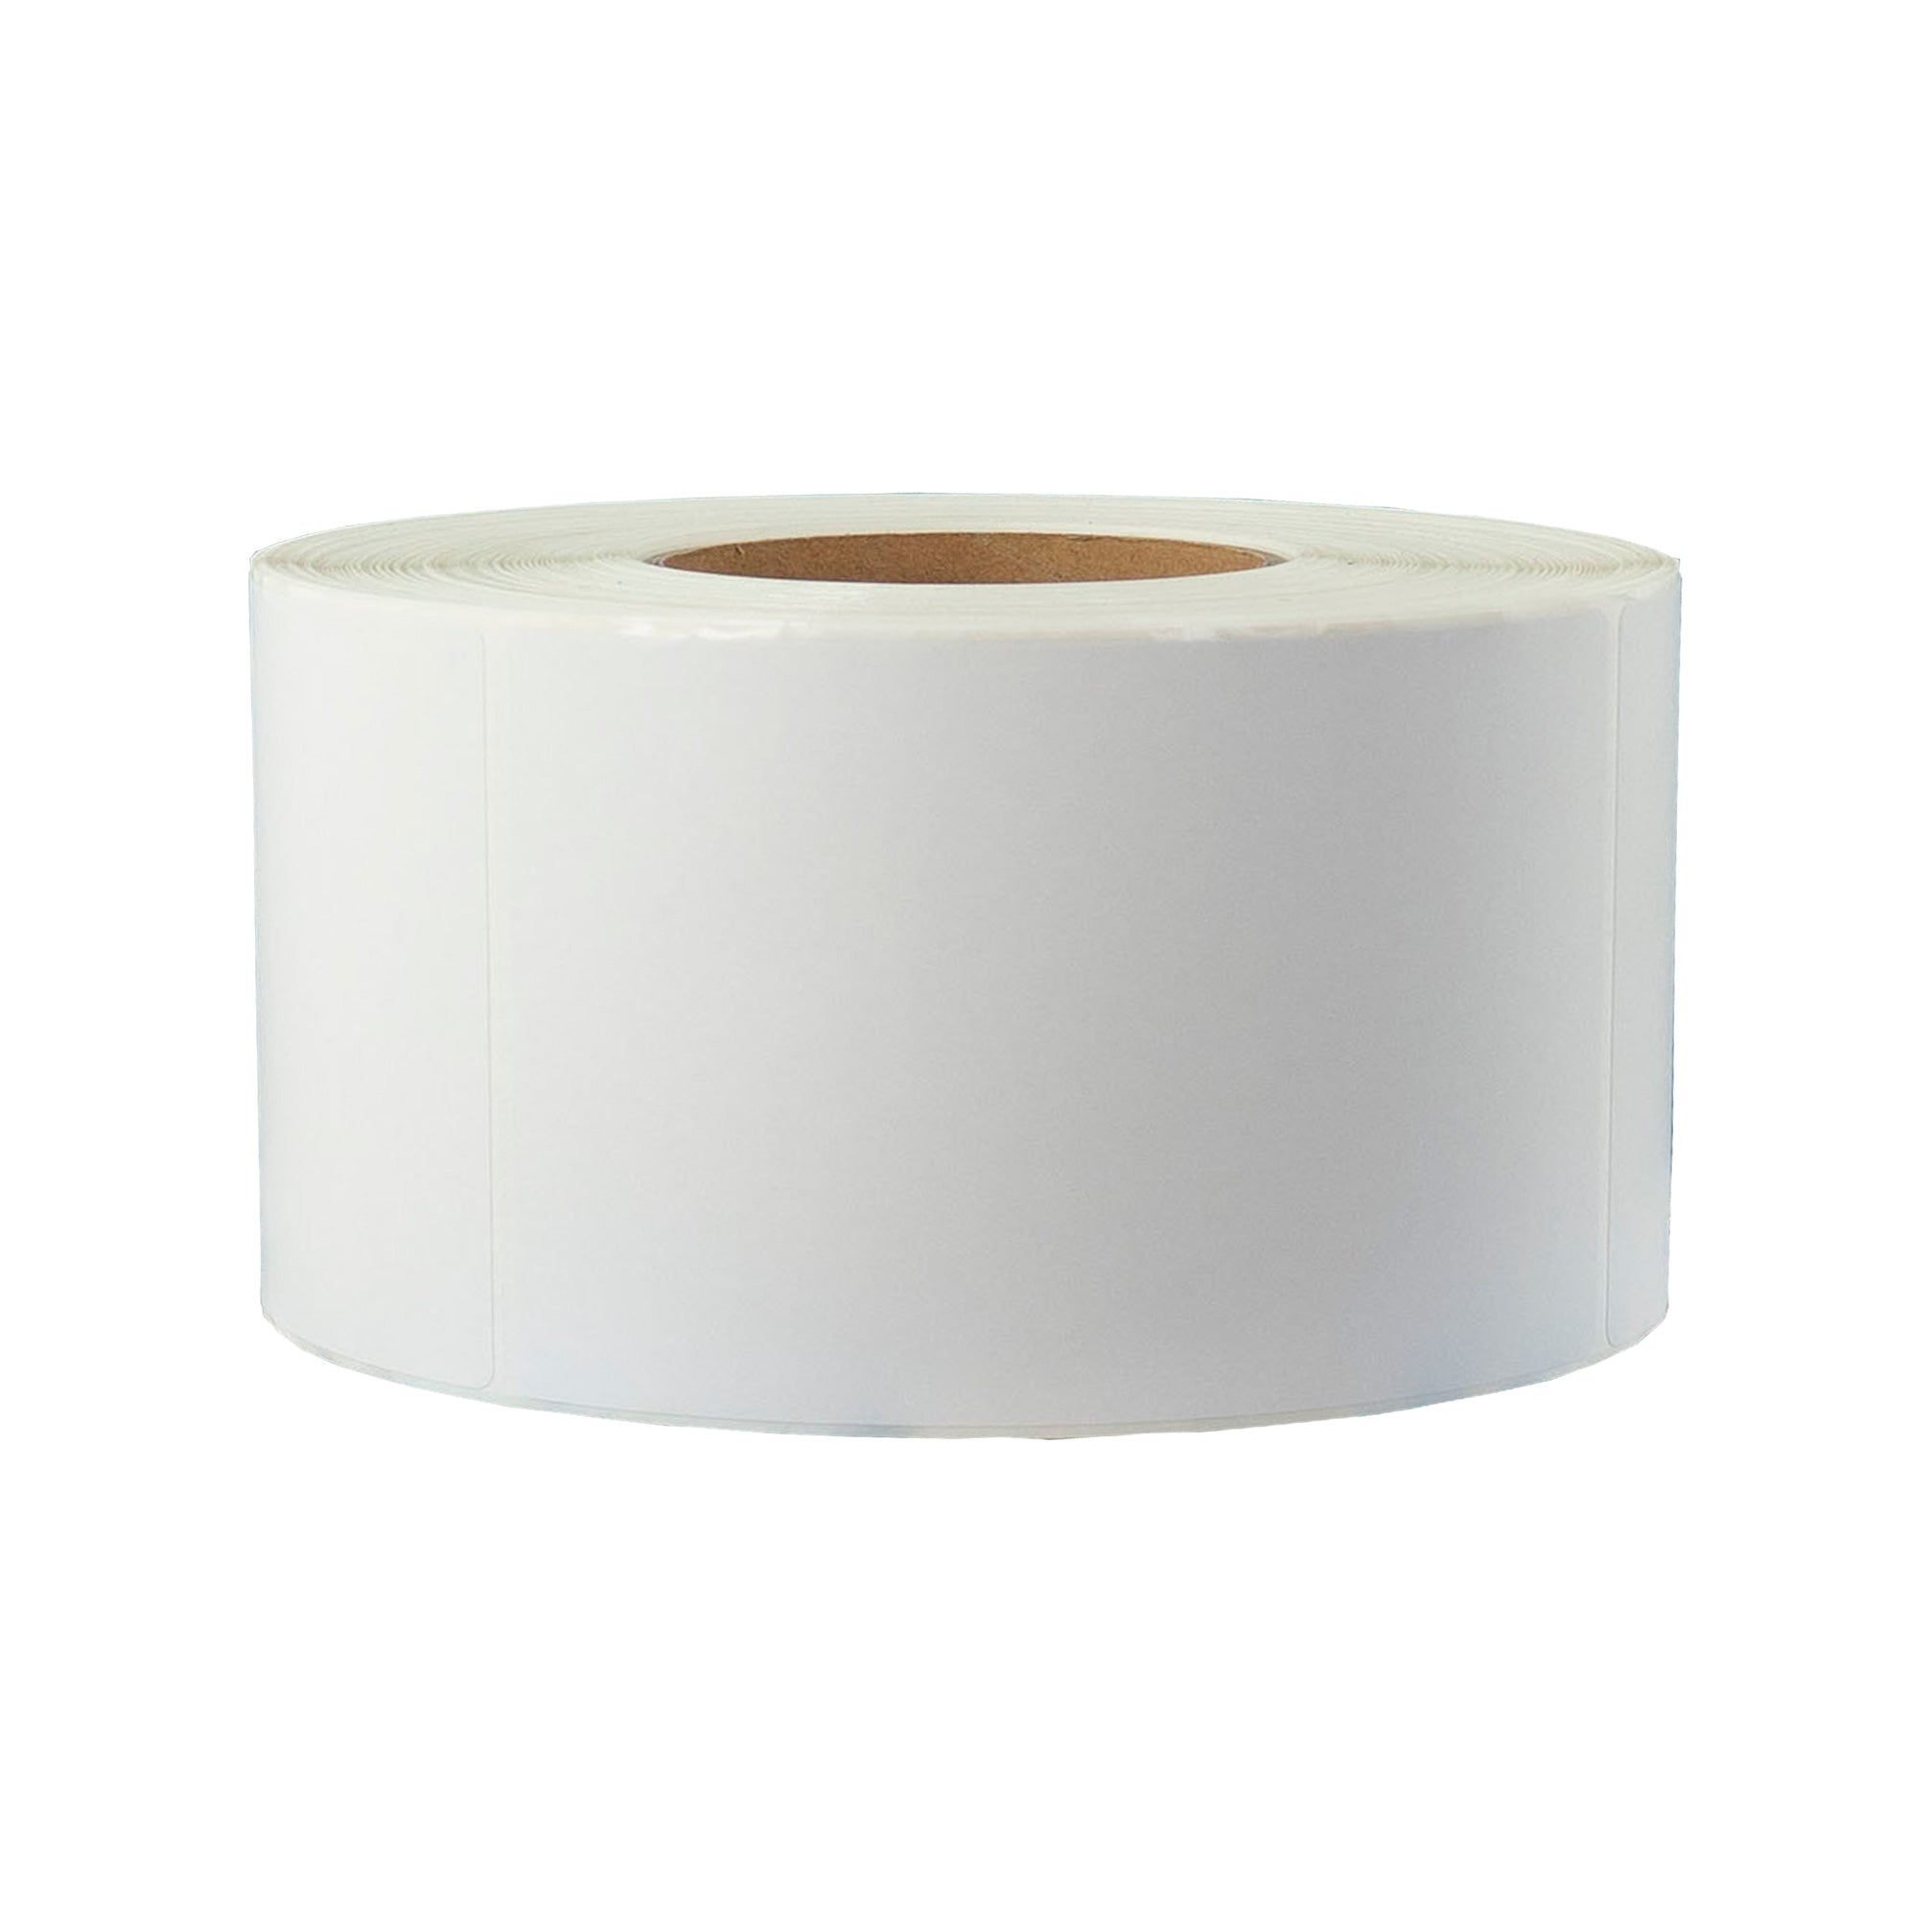 100mm x 150mm (4"x6") Direct Thermal Permanent Label, 1000 Labels Per Roll, 76mm Core, Perforated-48 Rolls